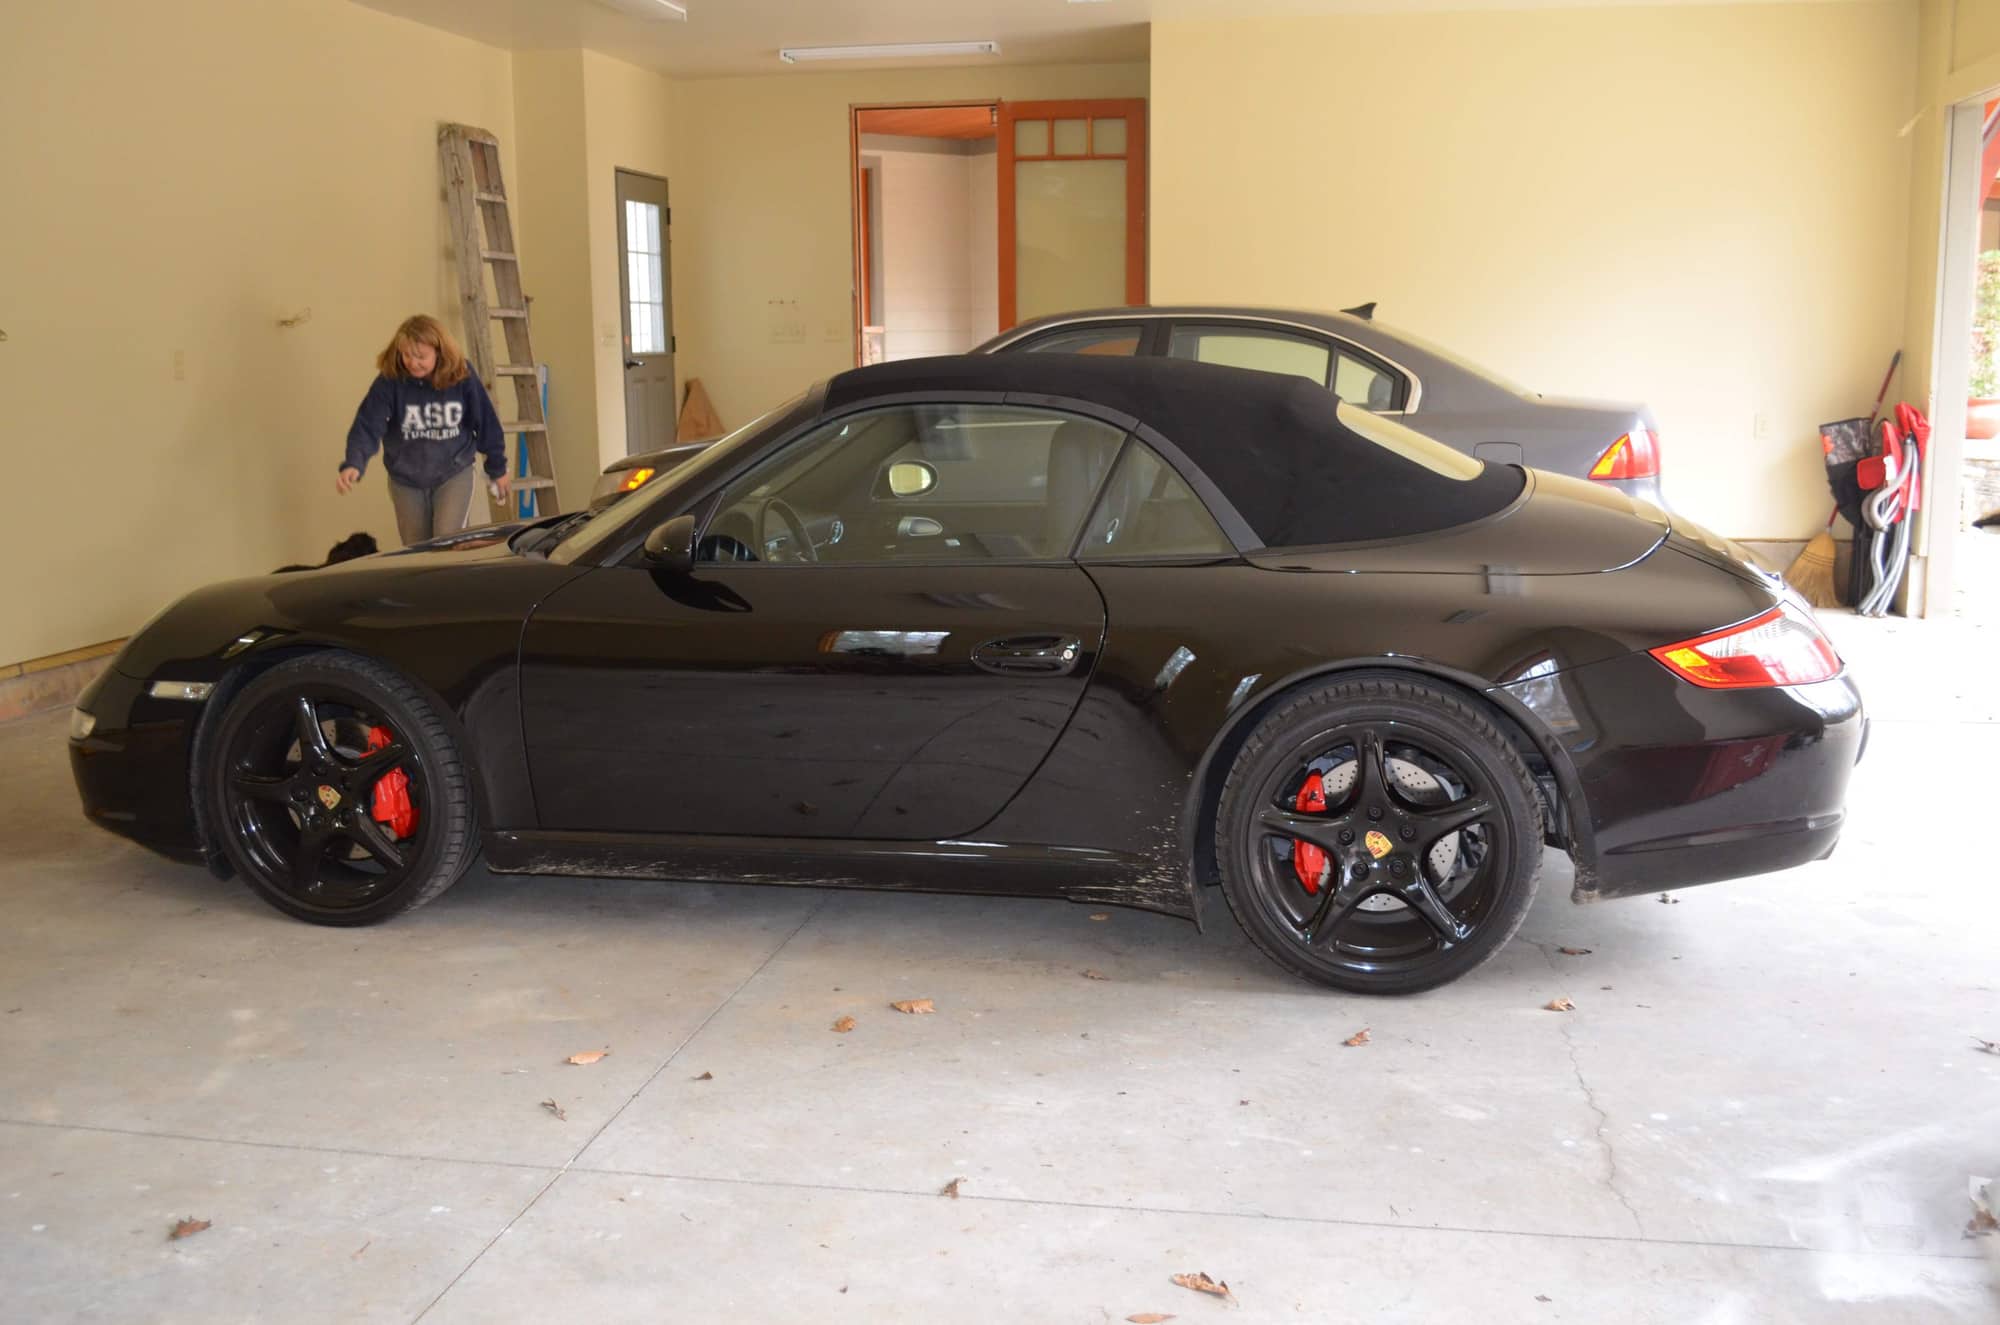 2006 Porsche 911 - 911S - engine issue - need to sell - Used - VIN wp0cb29916s765462 - 106,000 Miles - 6 cyl - 2WD - Manual - Convertible - Black - Charleston, SC 29406, United States